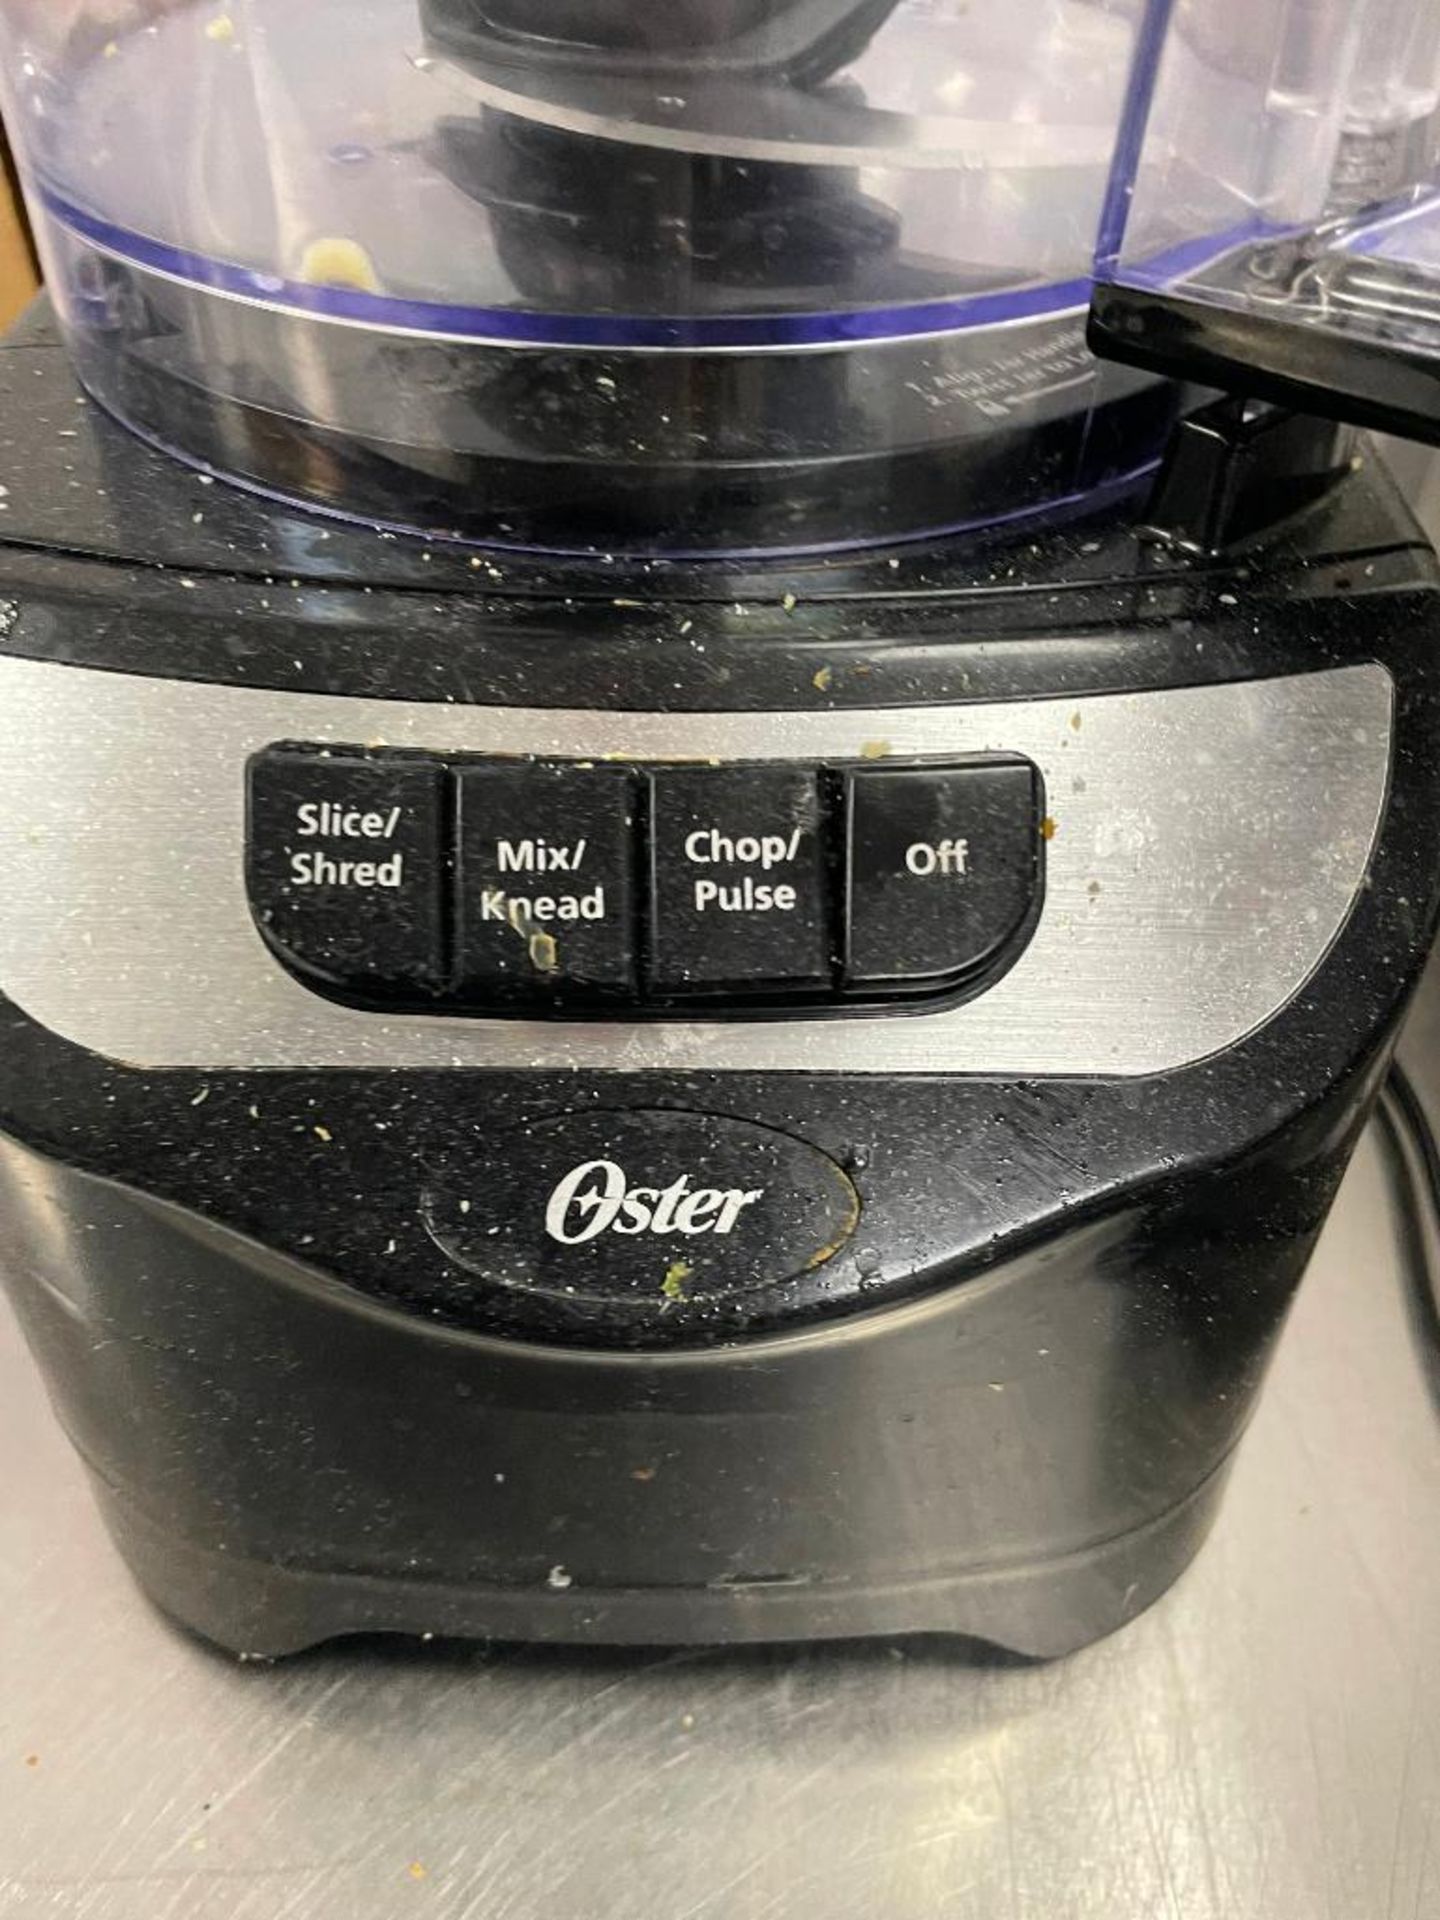 DESCRIPTION: OSTER FOOD PROCESSOR BRAND / MODEL: OSTER ADDITIONAL INFORMATION W/ BOX AND ADDITION JU - Image 3 of 3